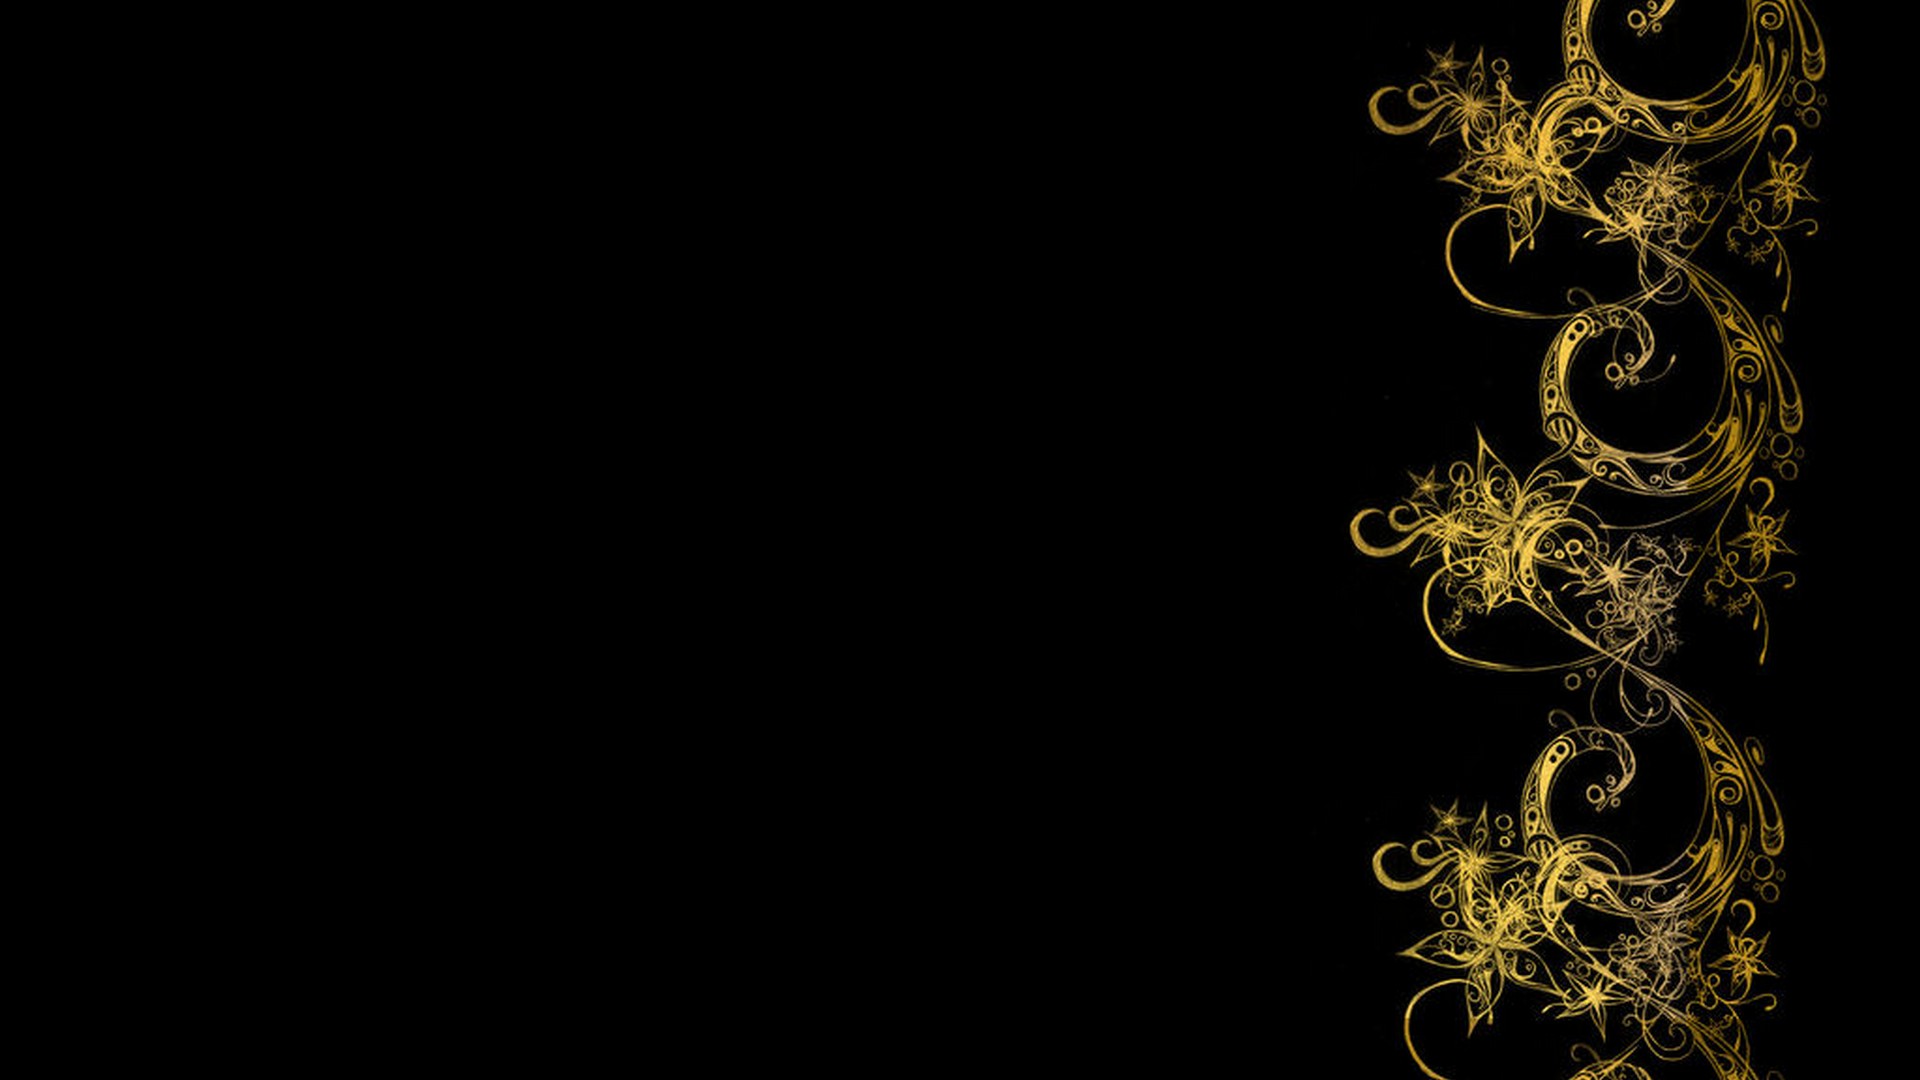 HD Wallpaper Black and Gold 1920x1080